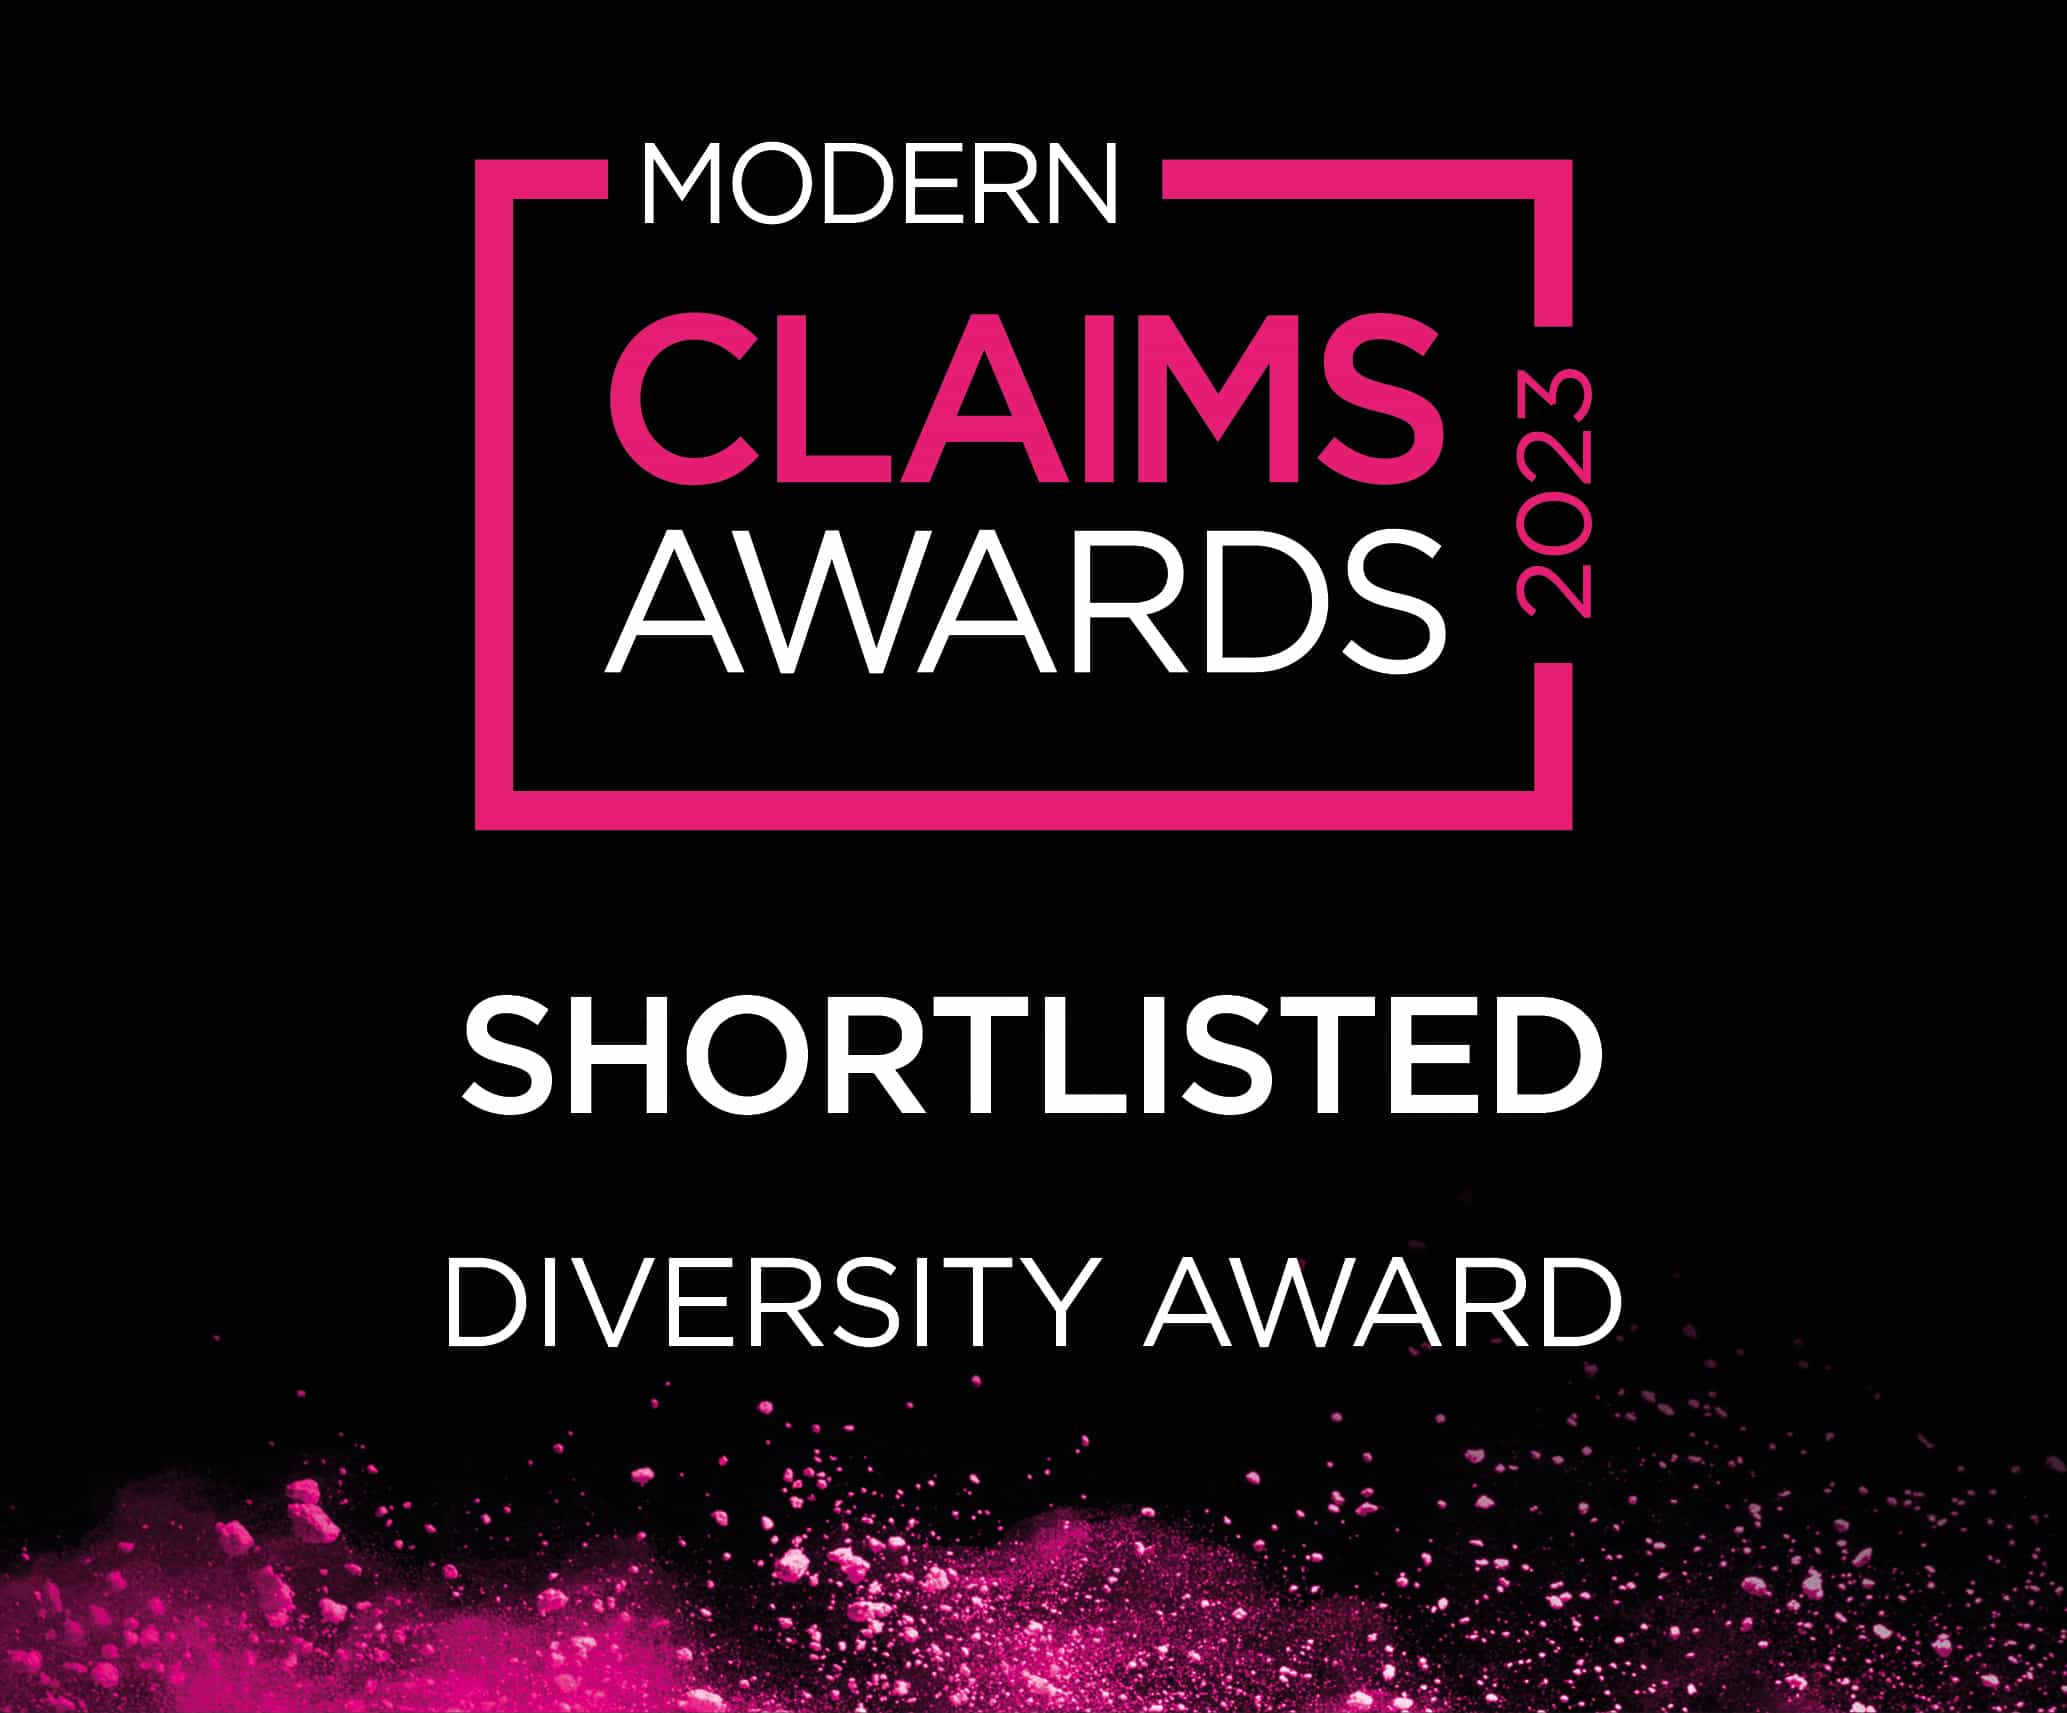 Parklane Plowden shortlisted for The Modern Claims Awards 2023